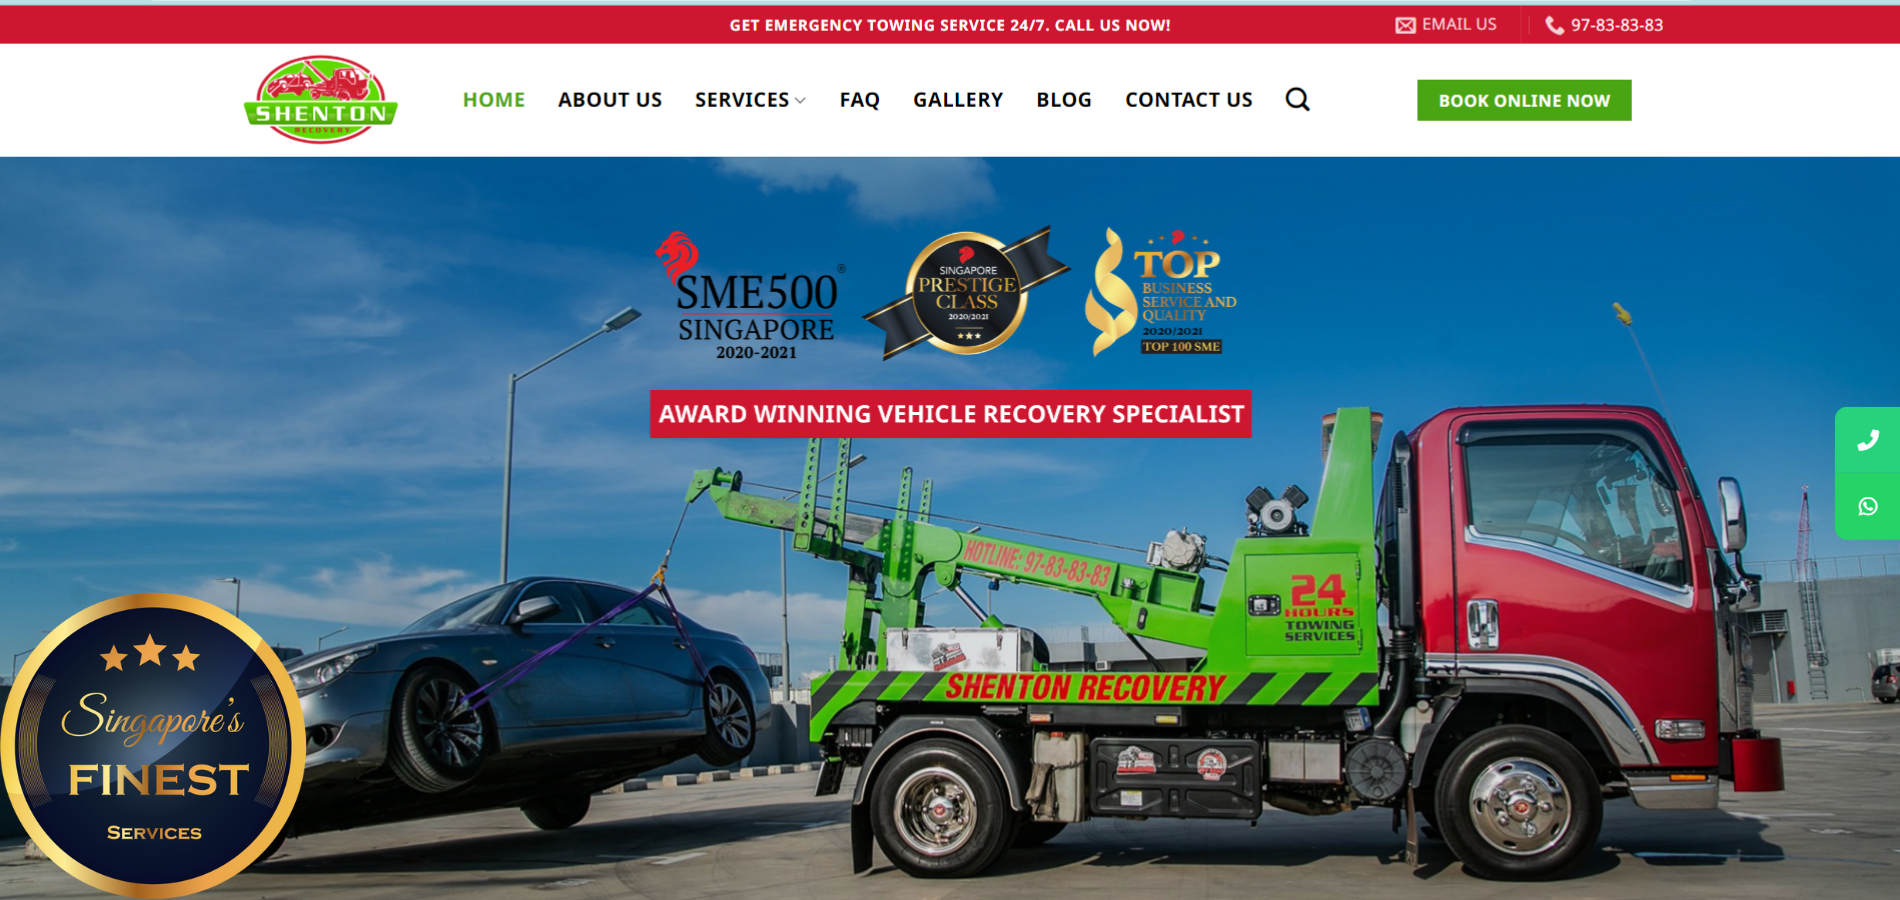 The Finest Car Towing Services in Singapore